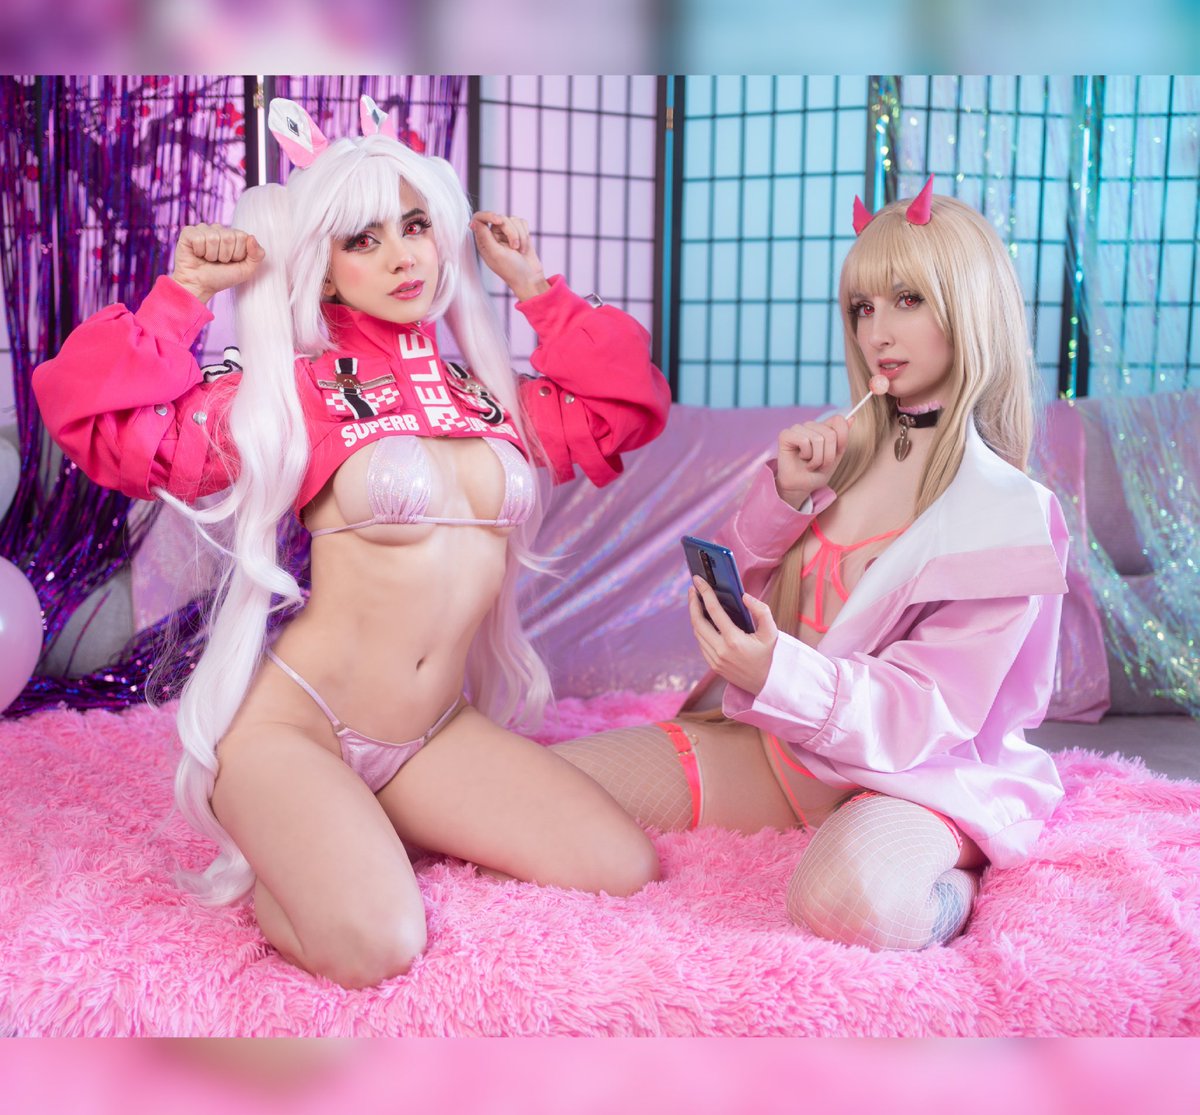 Alice x Viper! My first NIKKE cosplay with @ChaiCopito 💖 Will you join these babes pajama party?